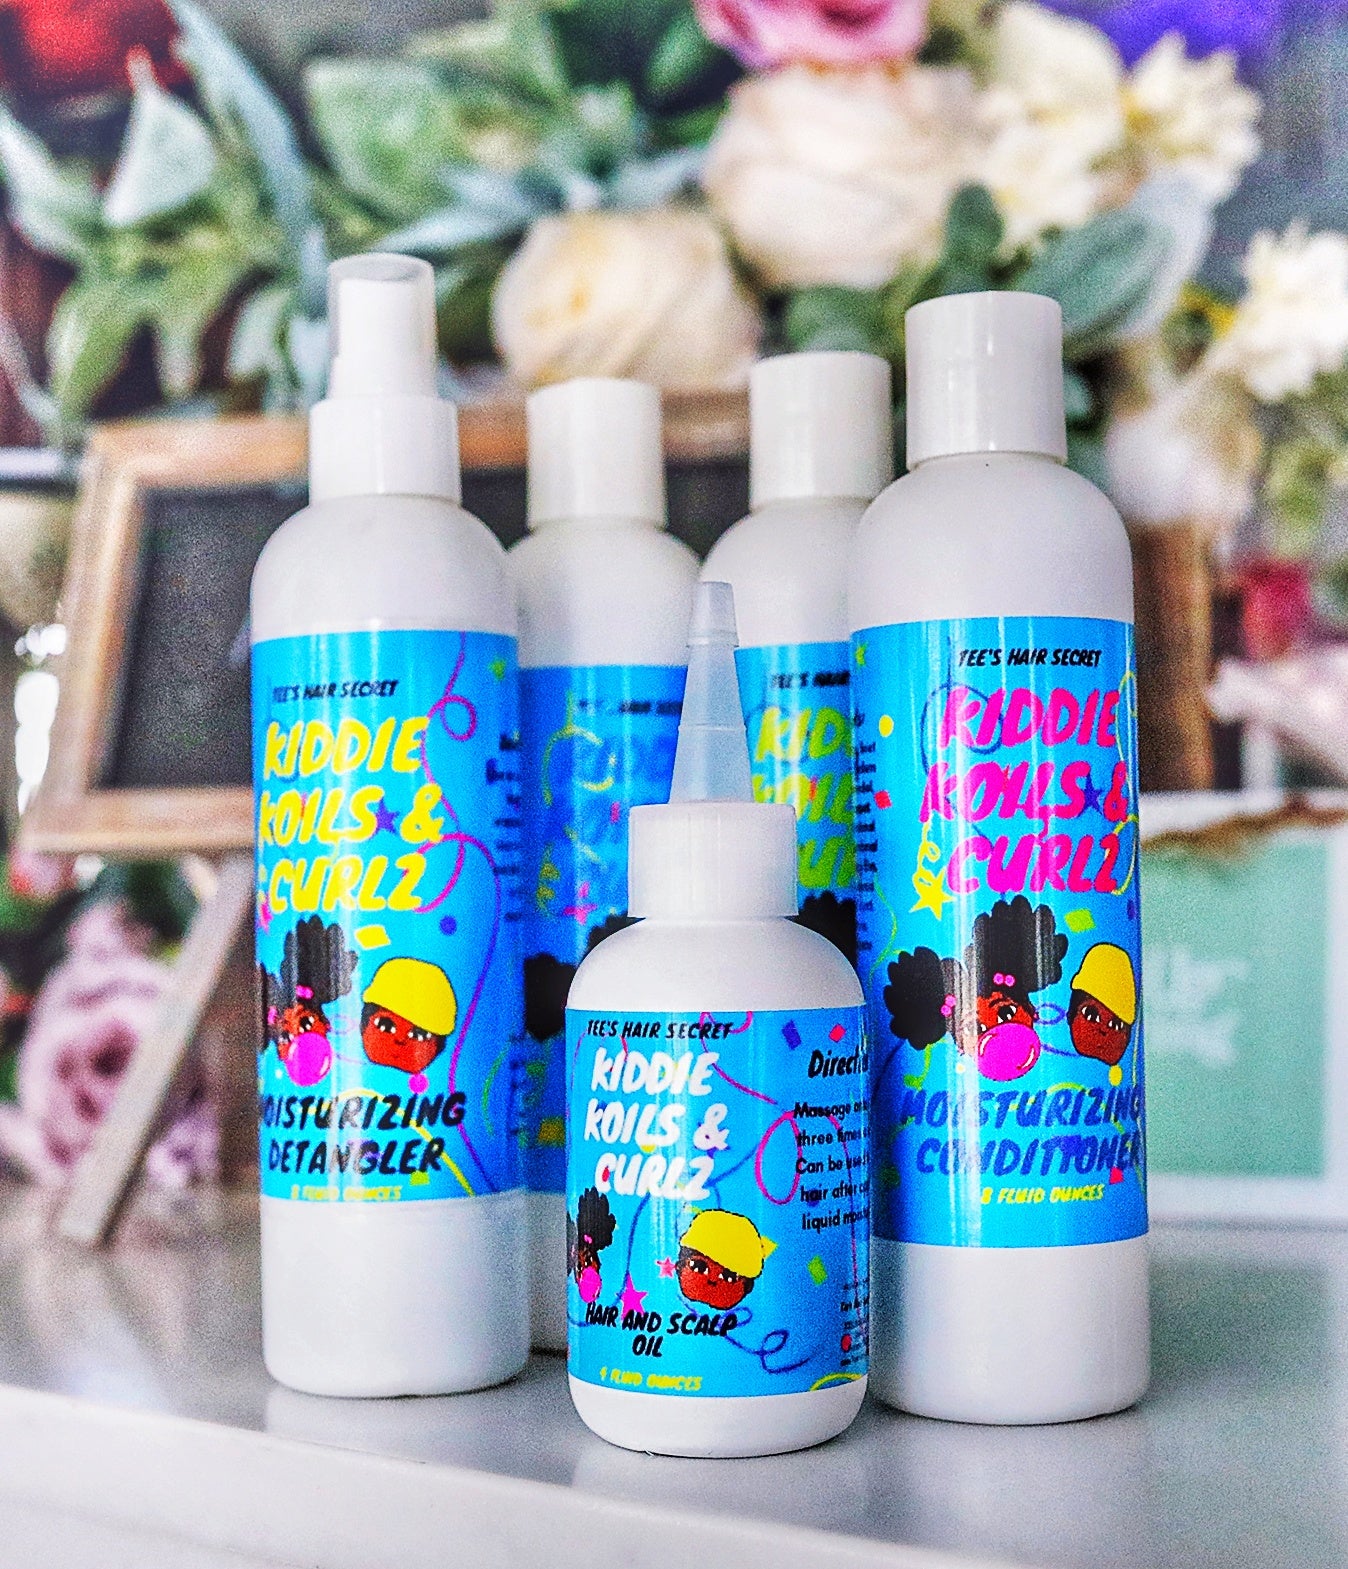 Black-owned kids hair care
